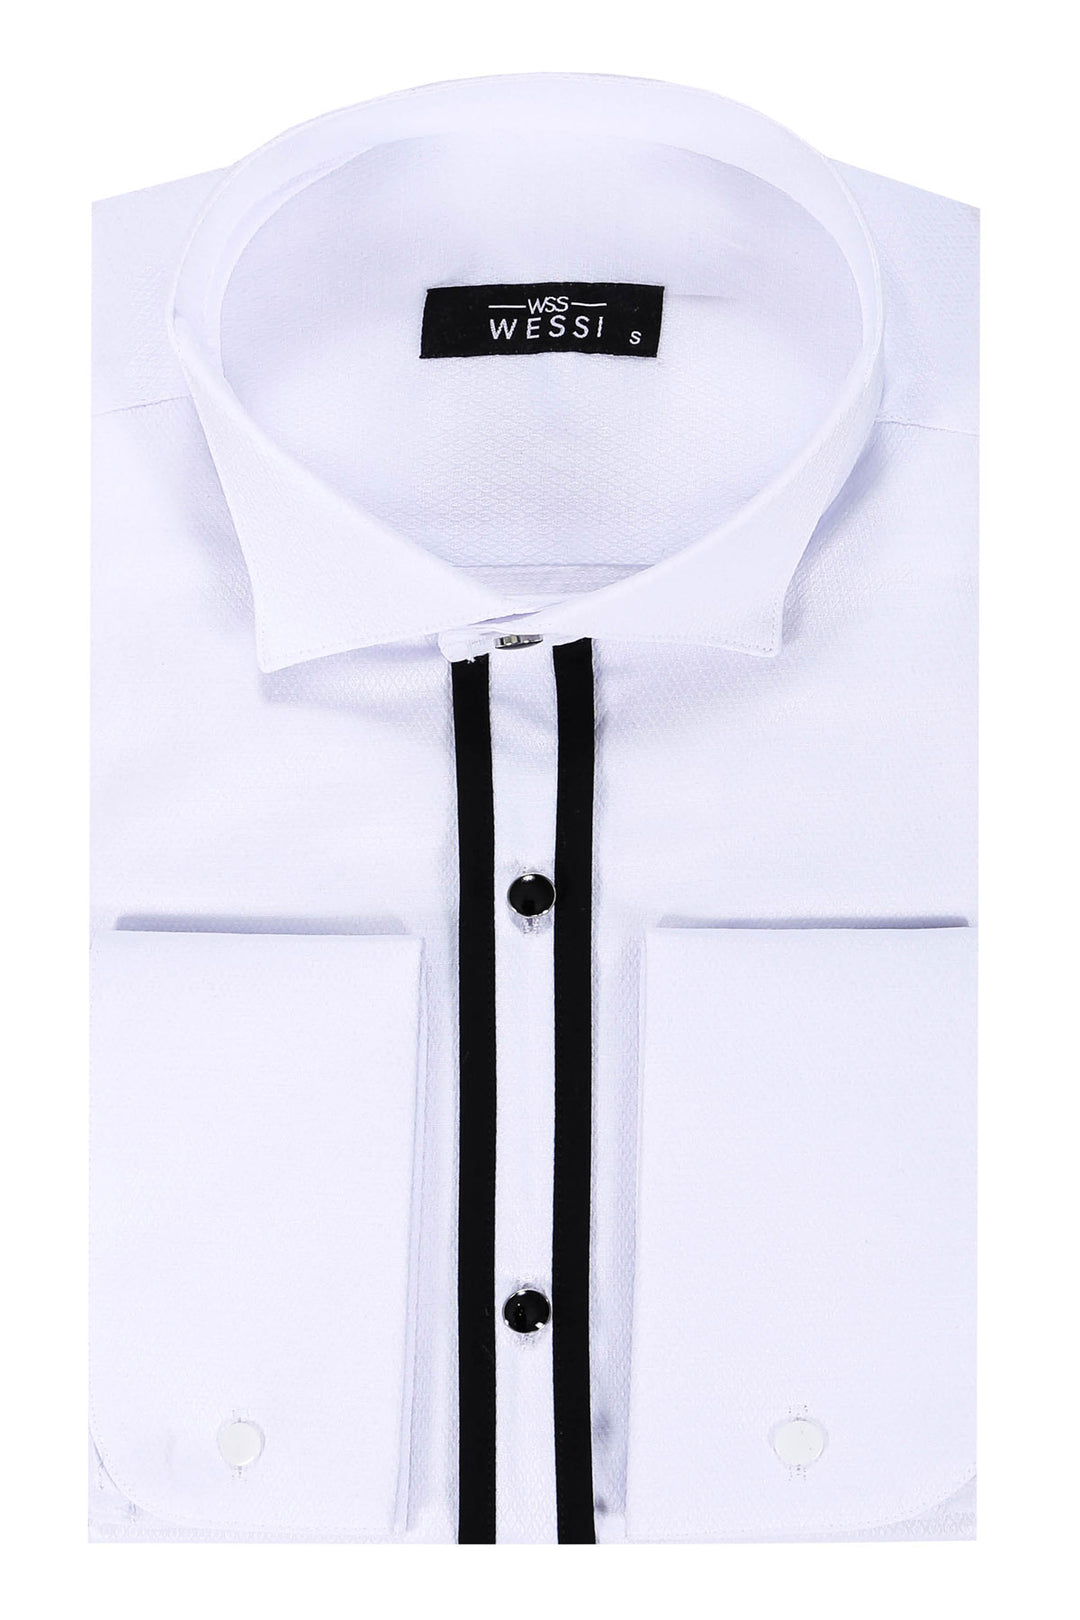 White Stand Collar Formal Shirt - Wessi